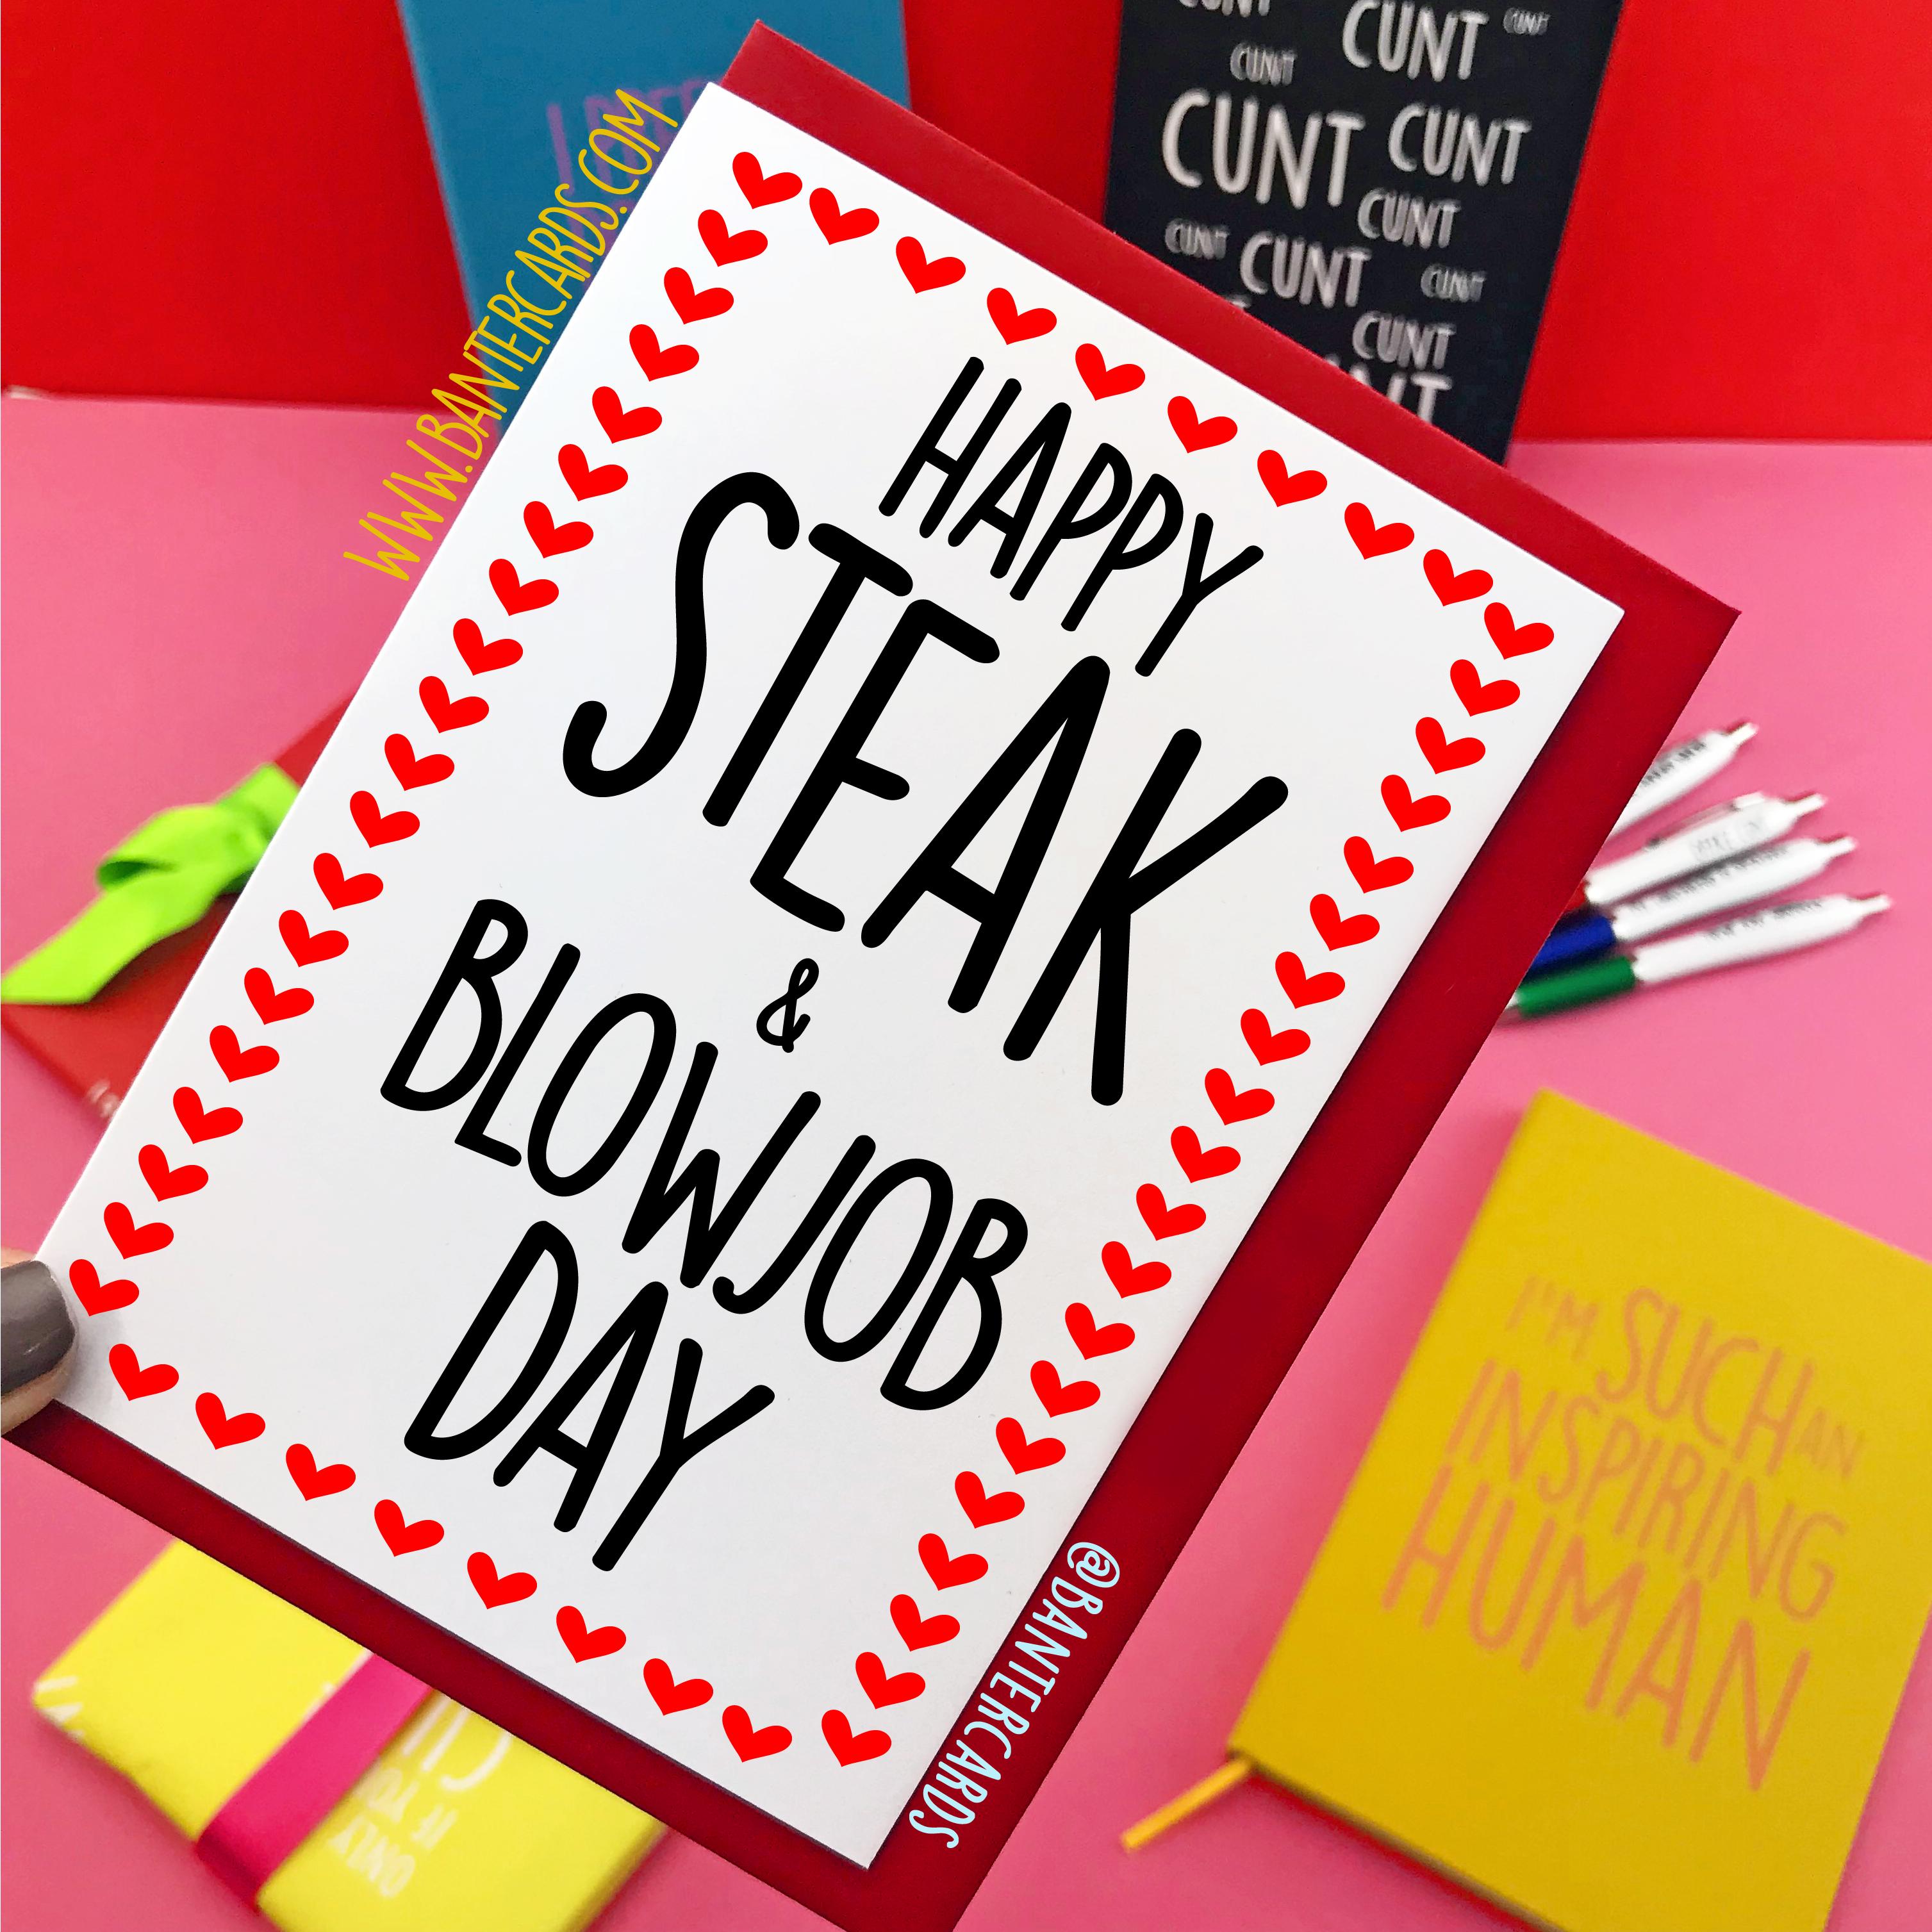 HAPPY STEAK AND BLOWJOB DAY SALE CARD